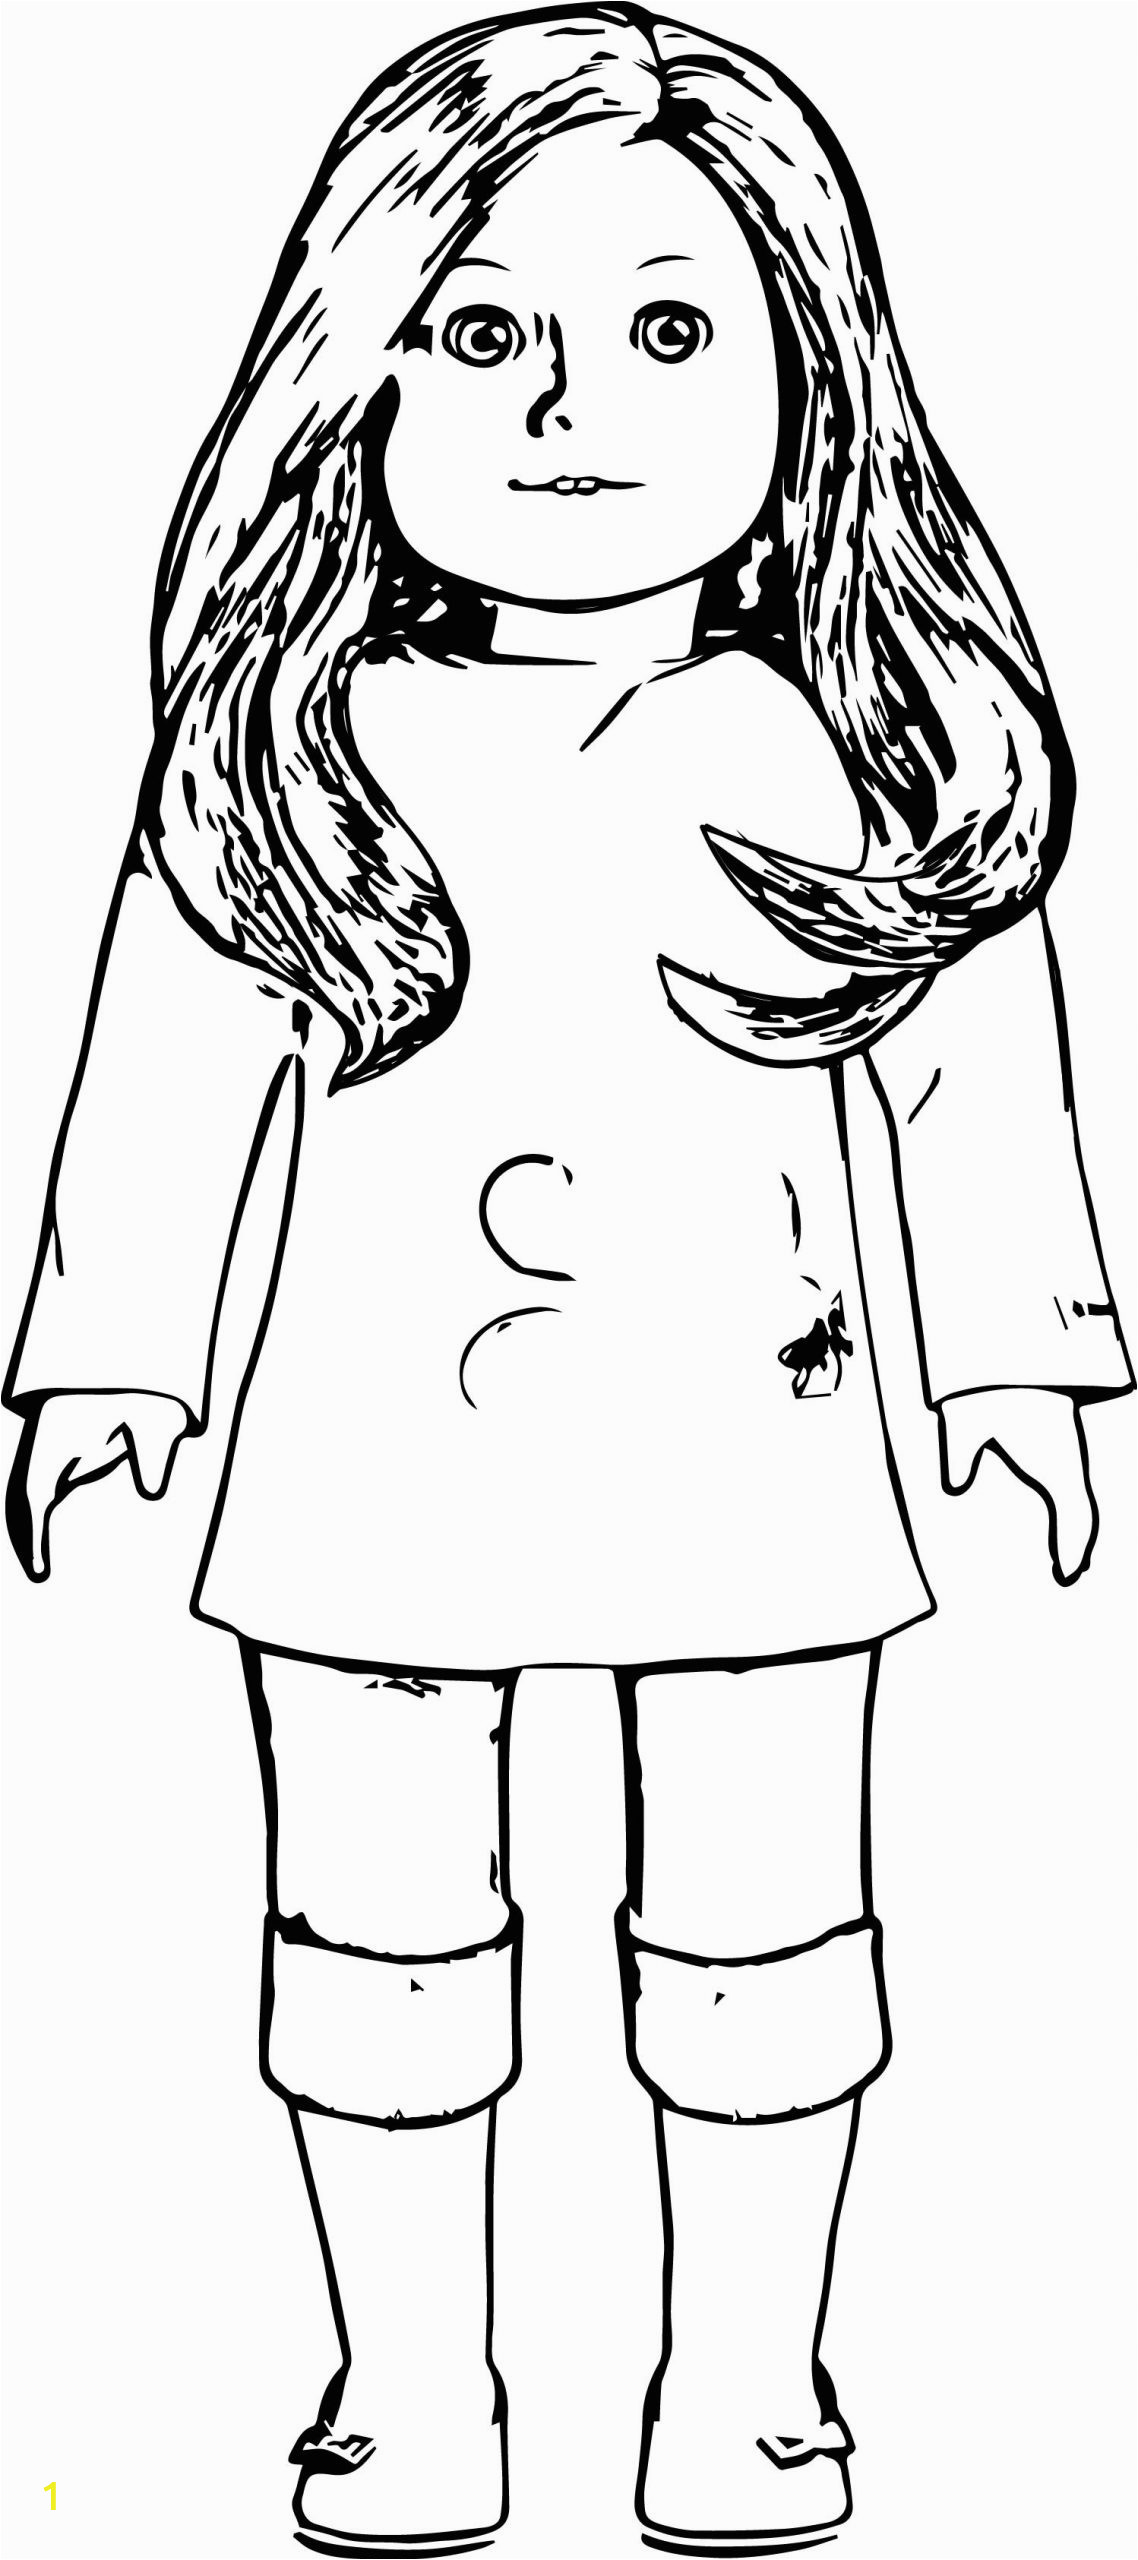 American Girl Doll Coloring Pages to Print American Girl Doll Coloring Pages to Print